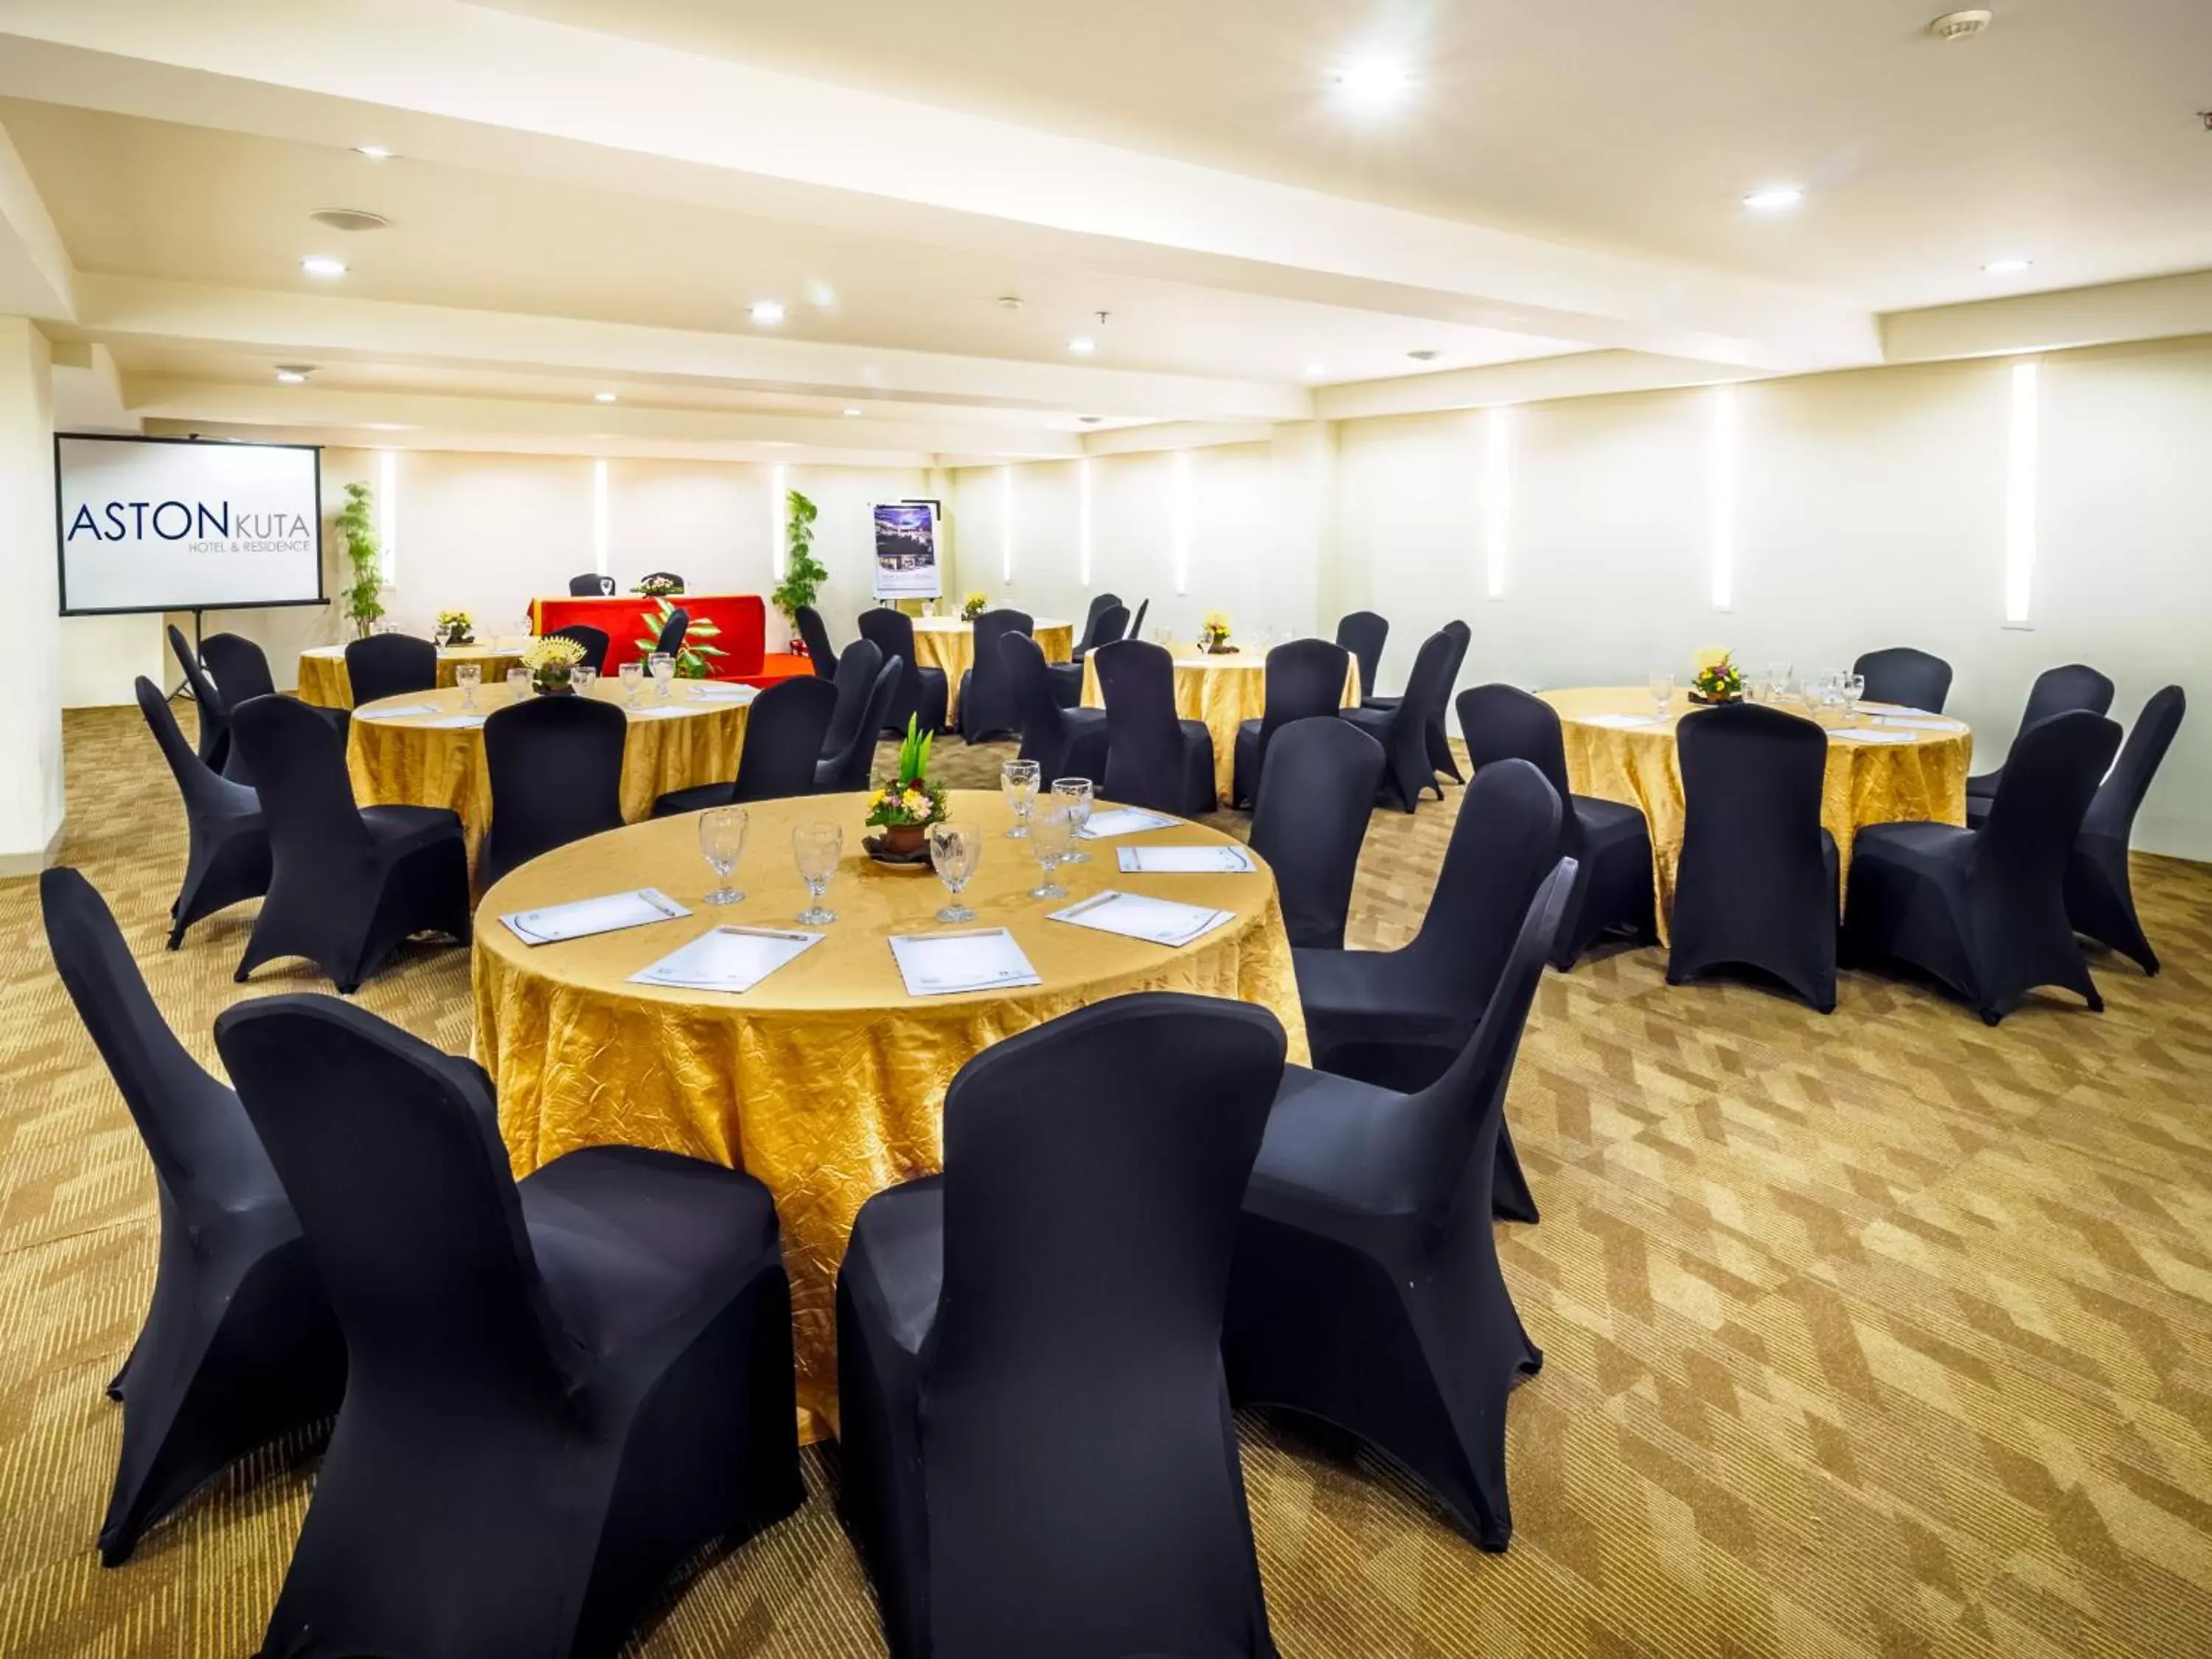 Meeting/conference room, Banquet Facilities in ASTON Kuta Hotel and Residence